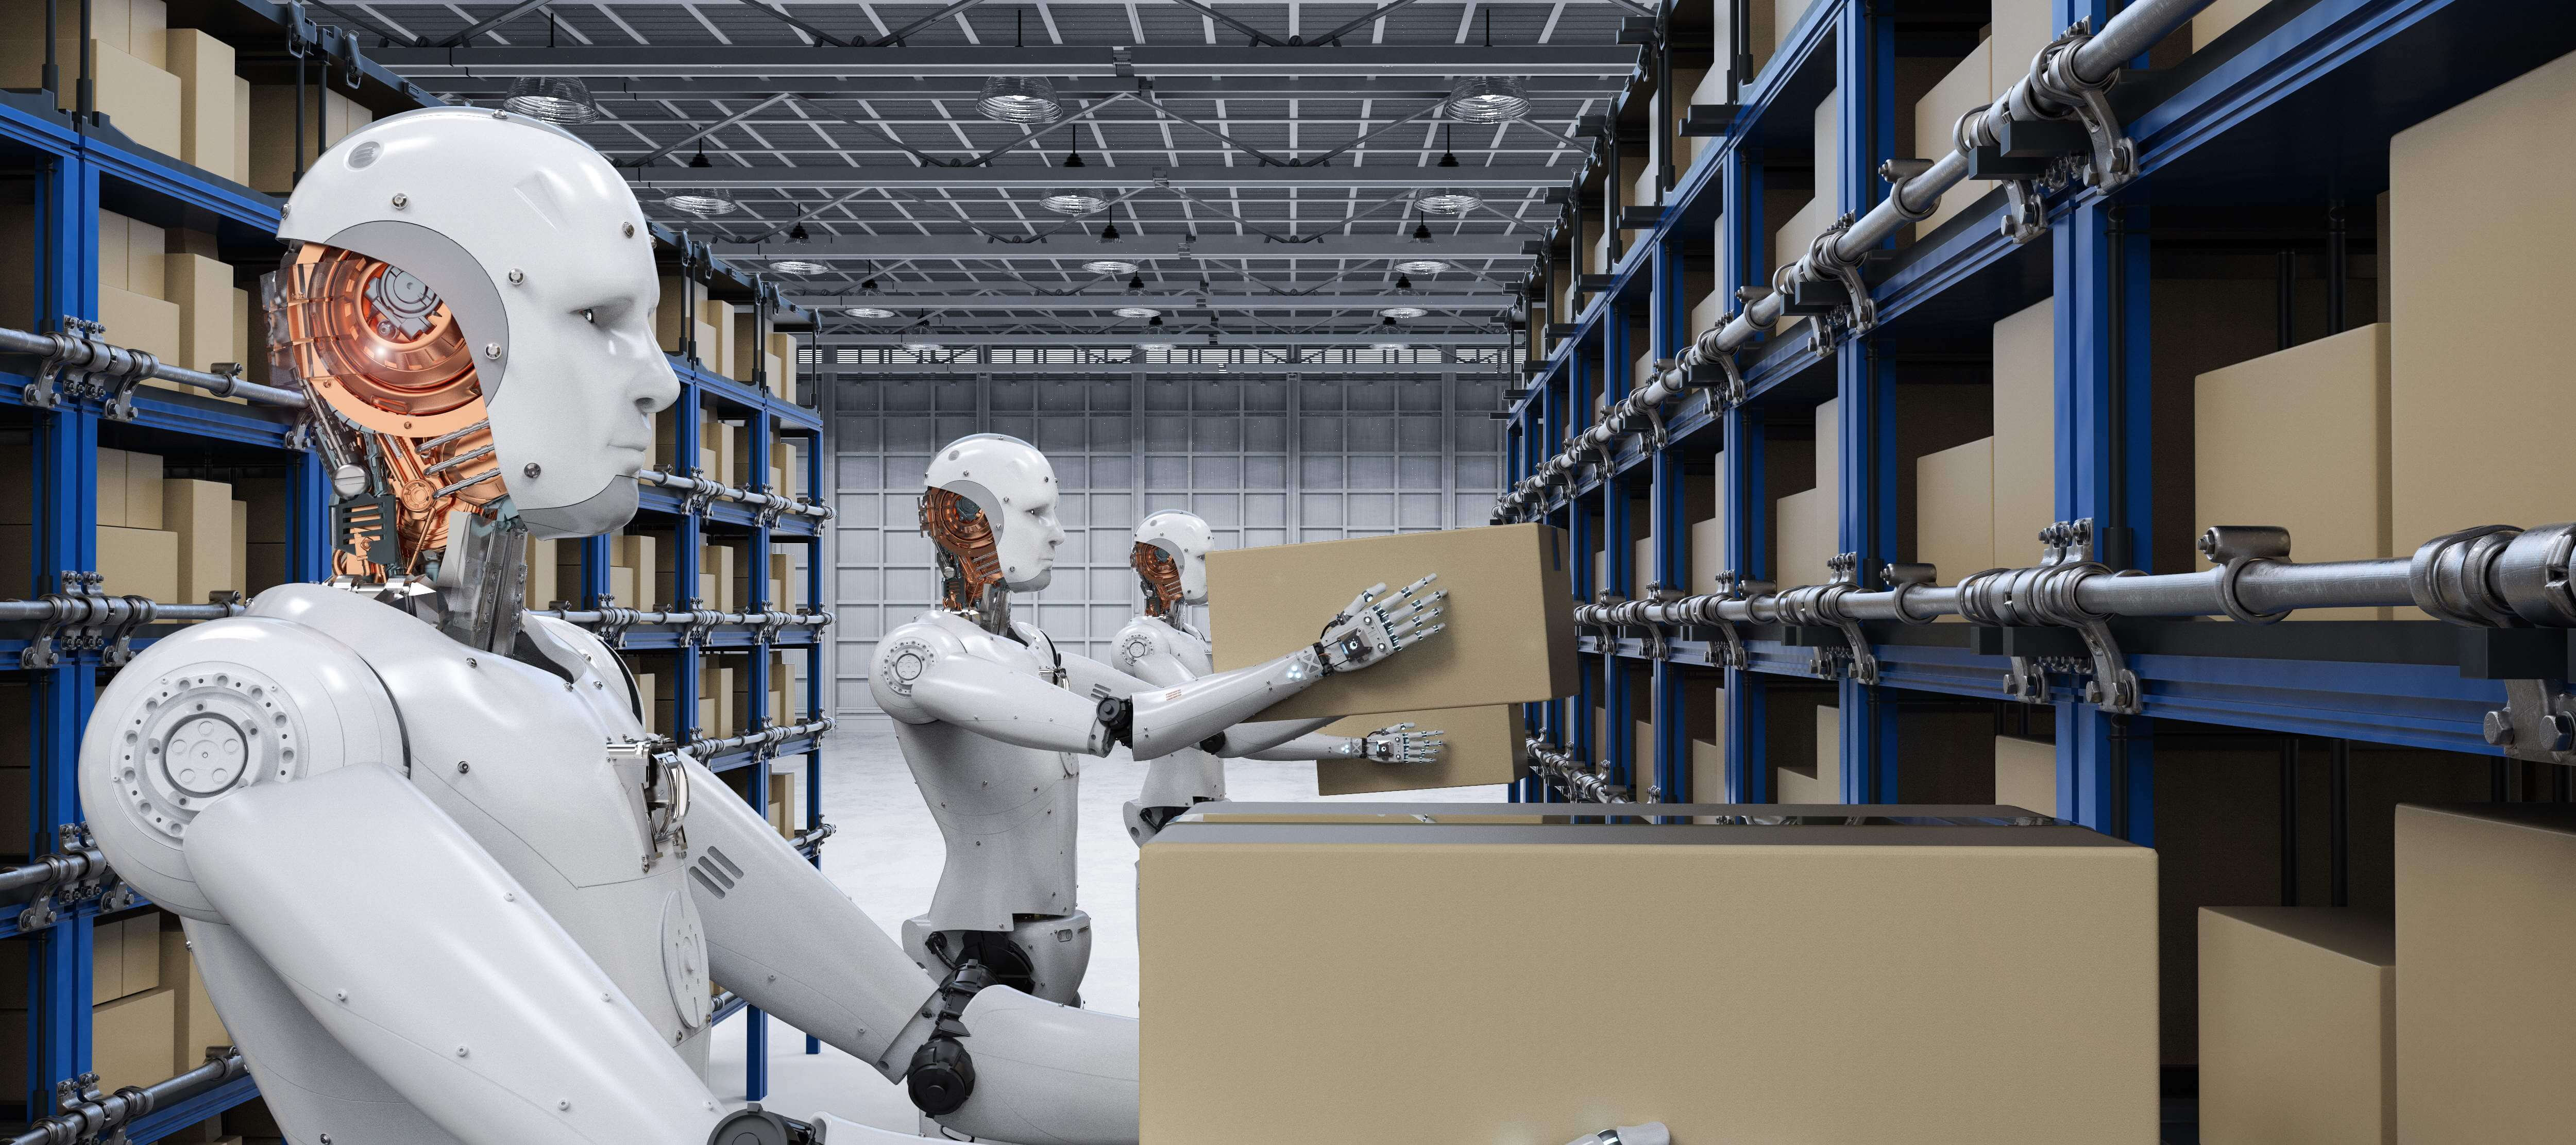 With 24.16% CAGR, Logistics Robots Market Worth will be US$ 49.4 Billion by 2027